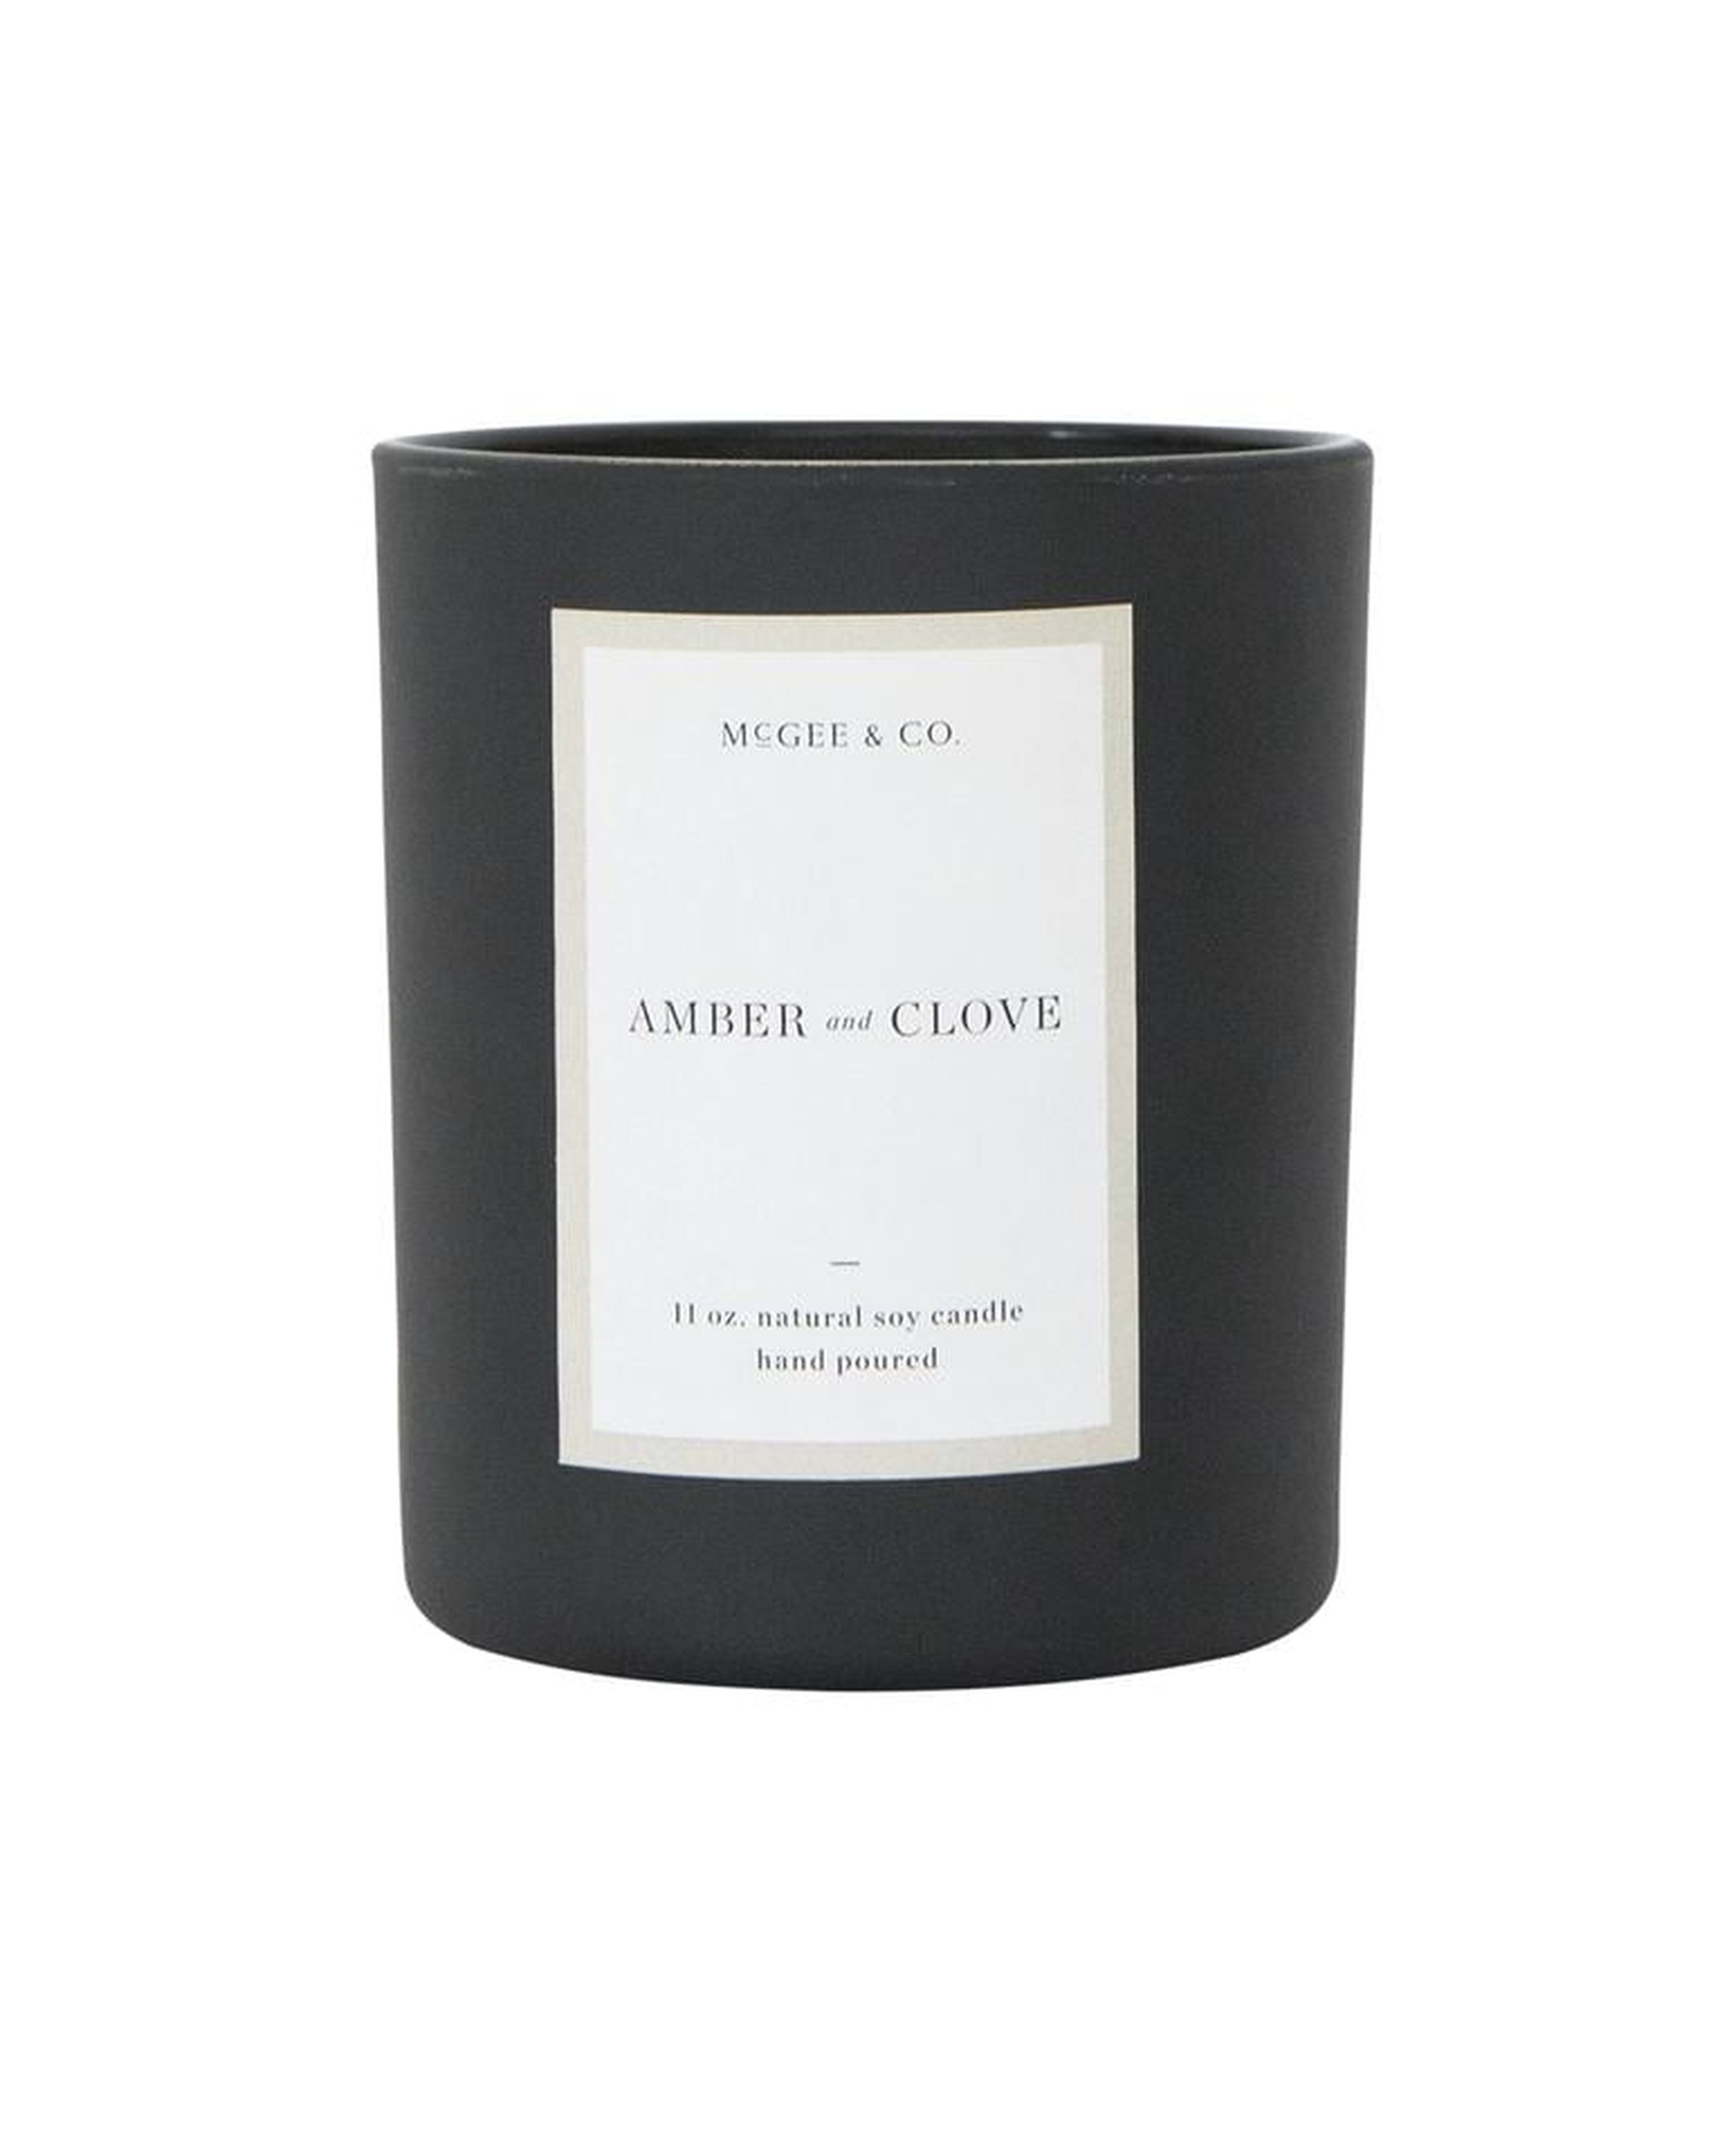 AMBER + CLOVE CANDLE - McGee & Co.